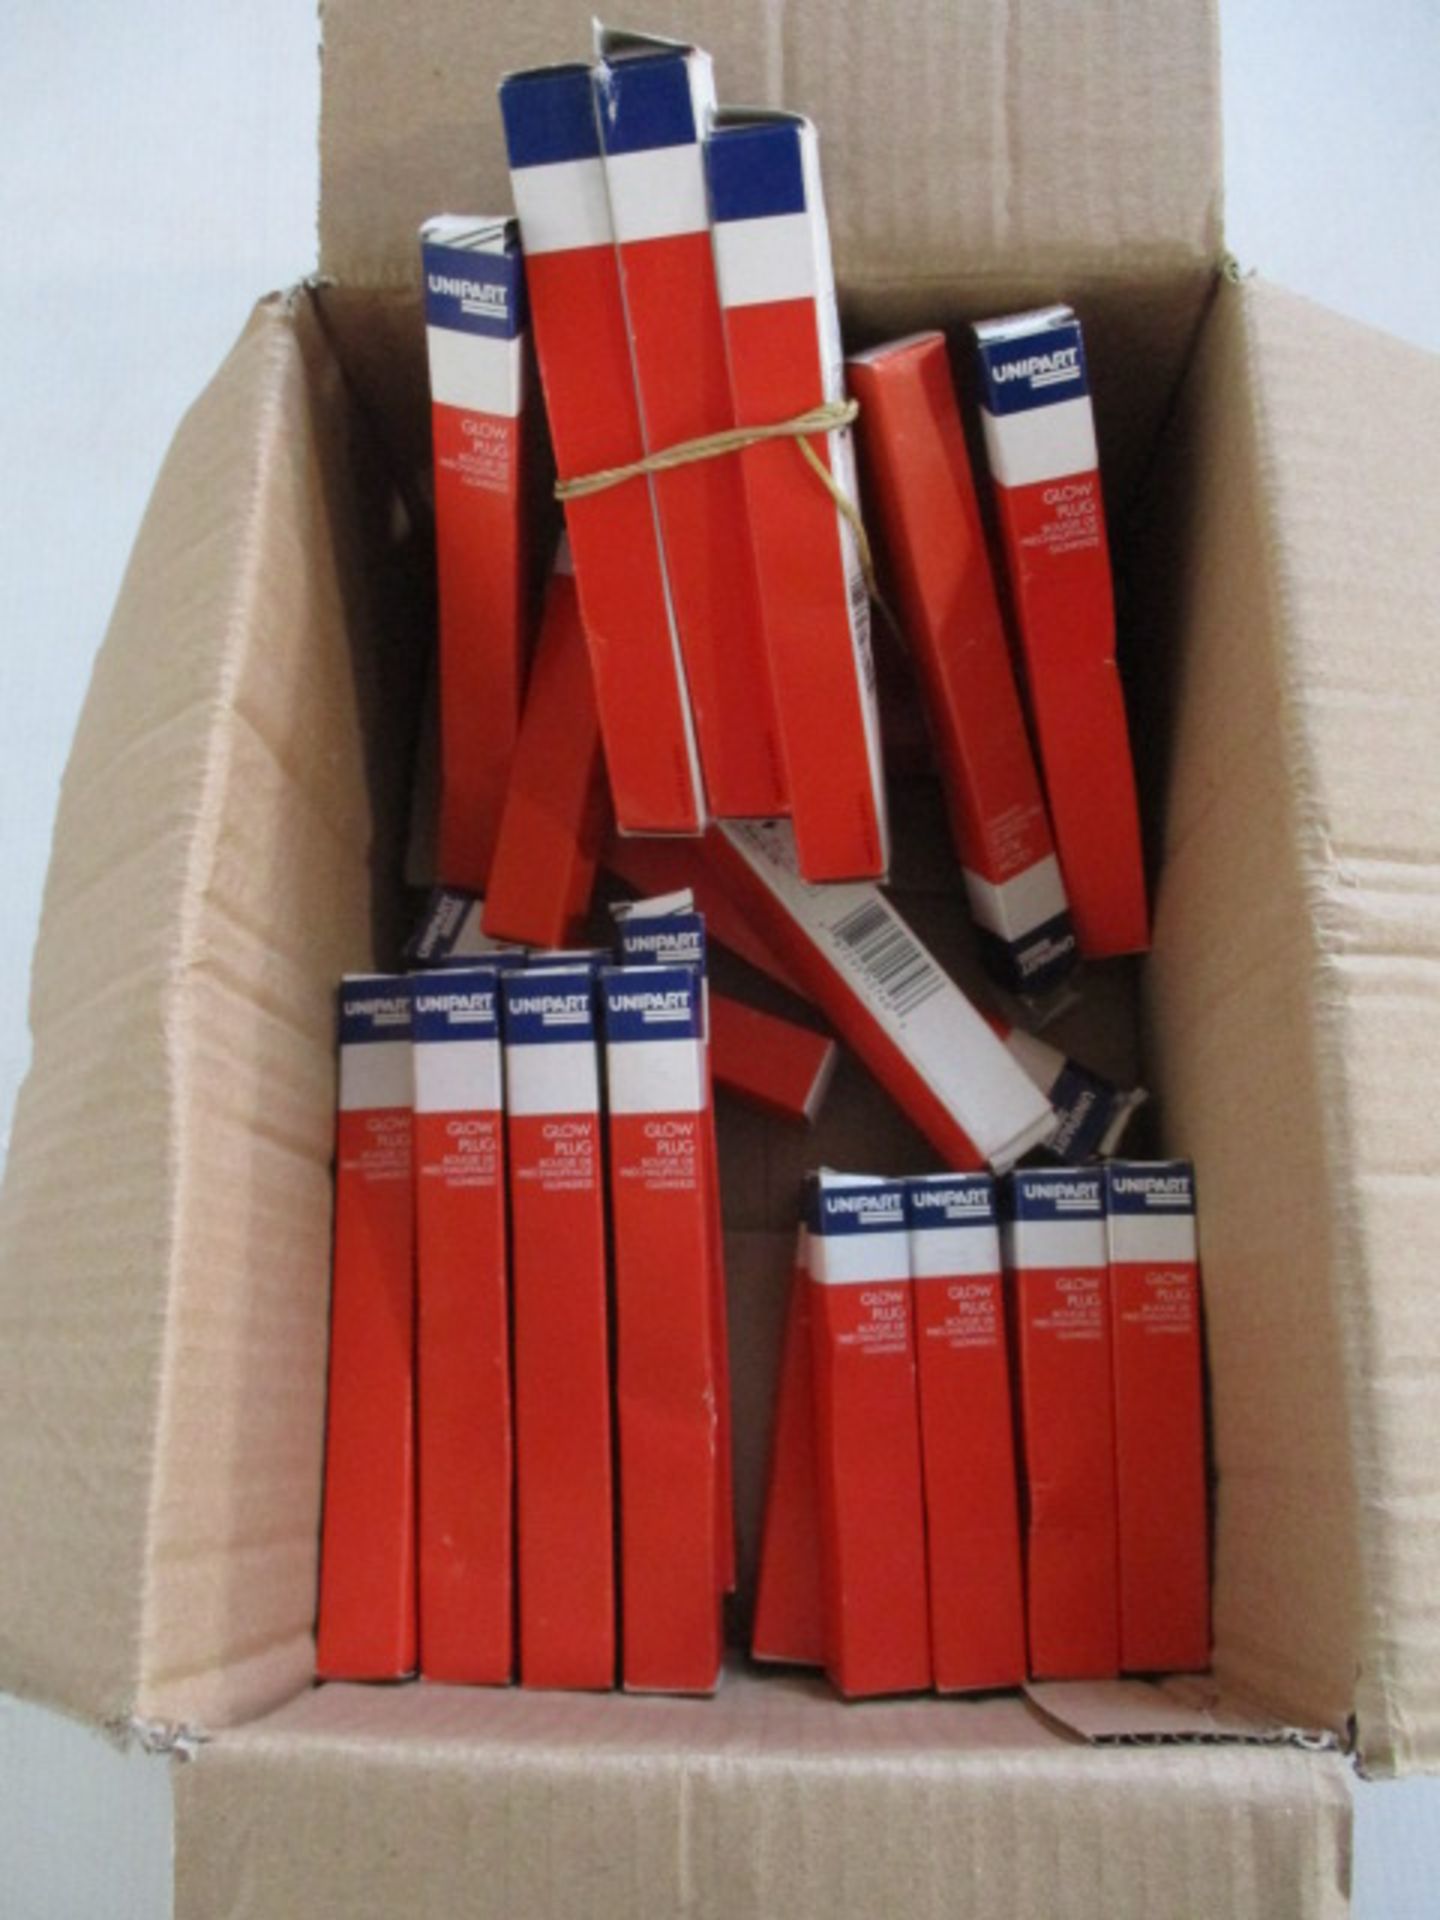 Large qty new and unused glow plugs as pictured assorted models - approx 30 pcs